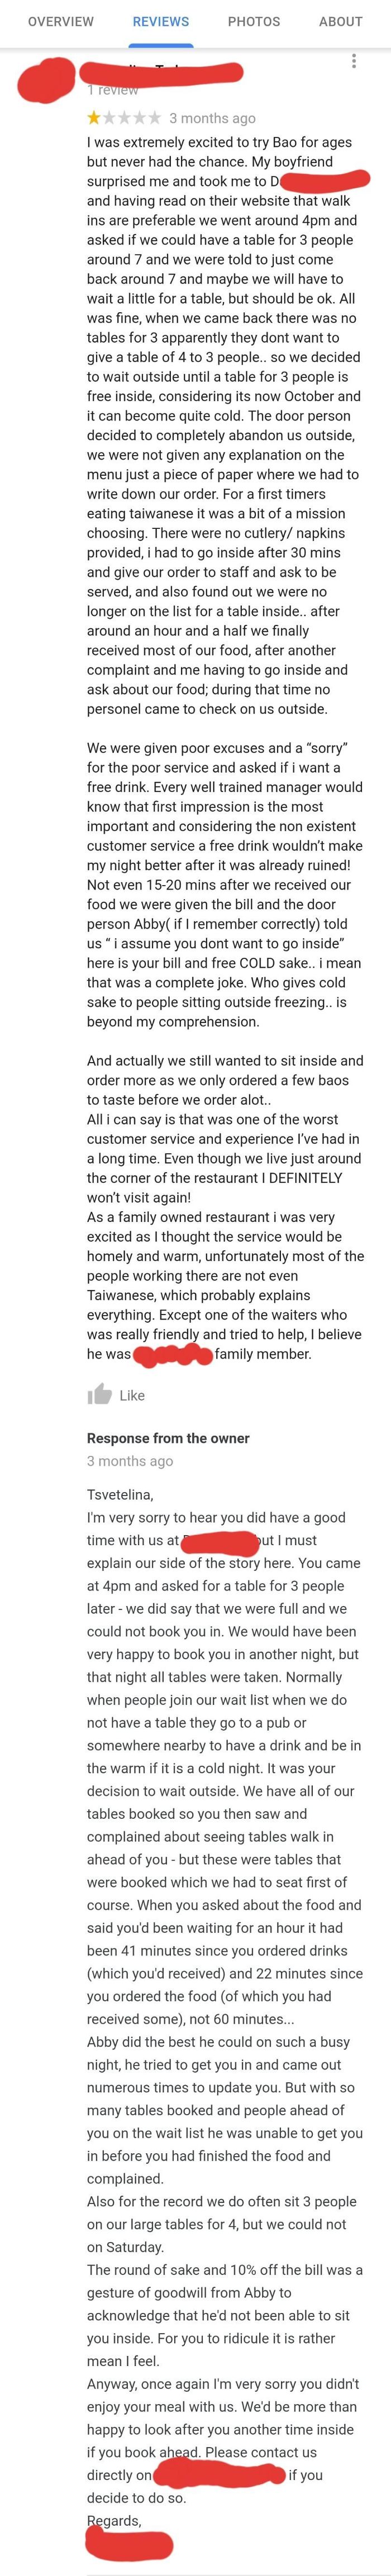 Lying Customer Tries To Take Down A Family Run Restaurant, Owner Efficiently Tells Them Where To Go